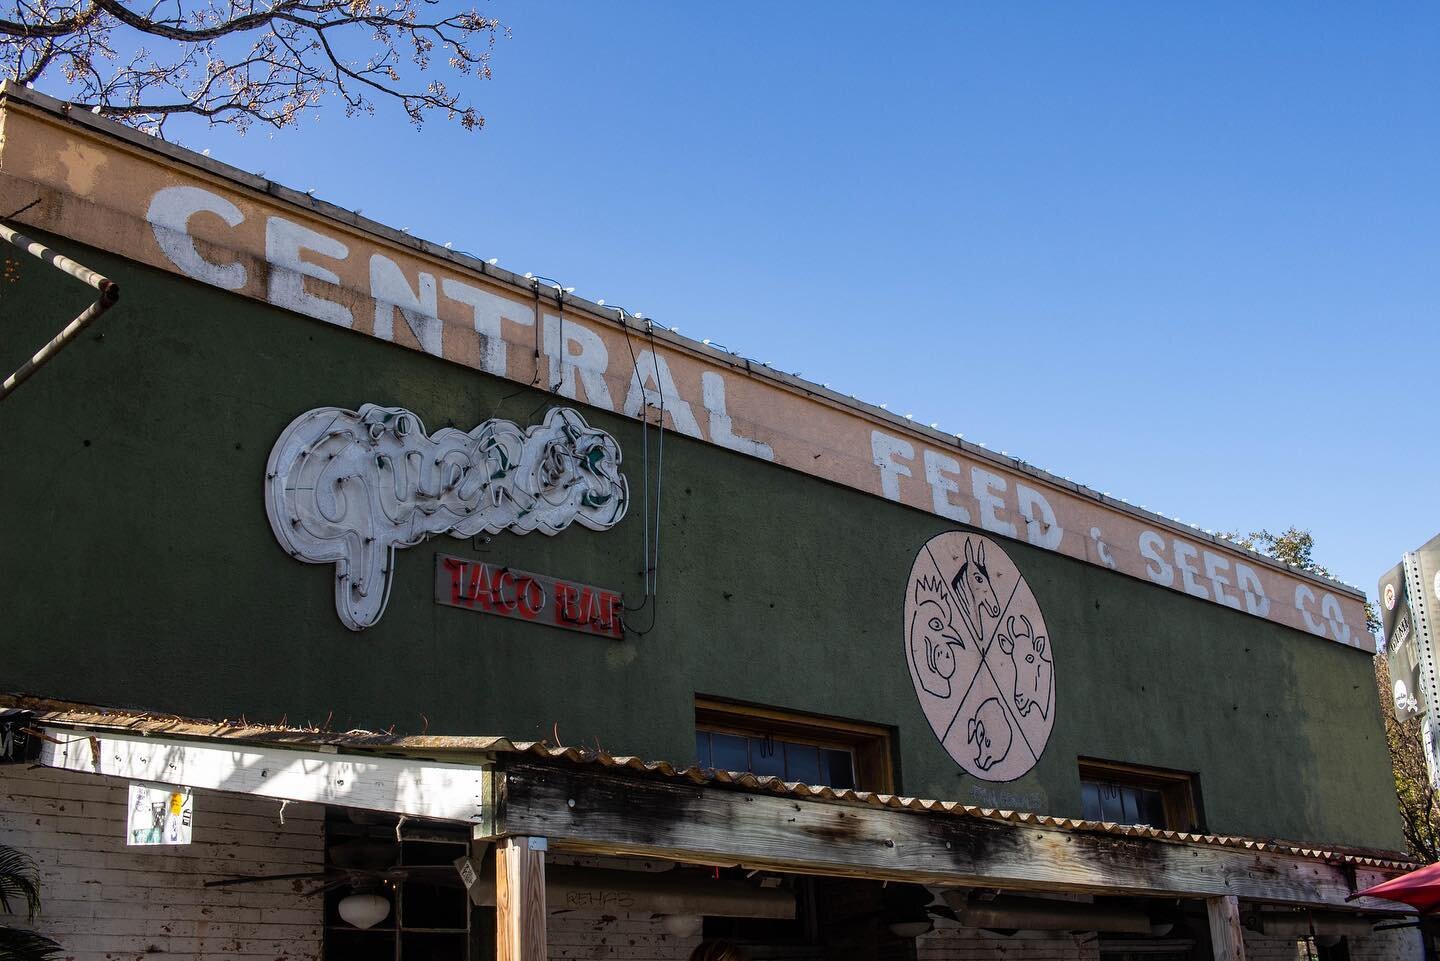 Austin, Texas // where tradition and antiquity meet new age energy and progress. Exemplified by the sounds, sights, and flavors of South Congress Street. @guerostacobar sits right at heart of the action.